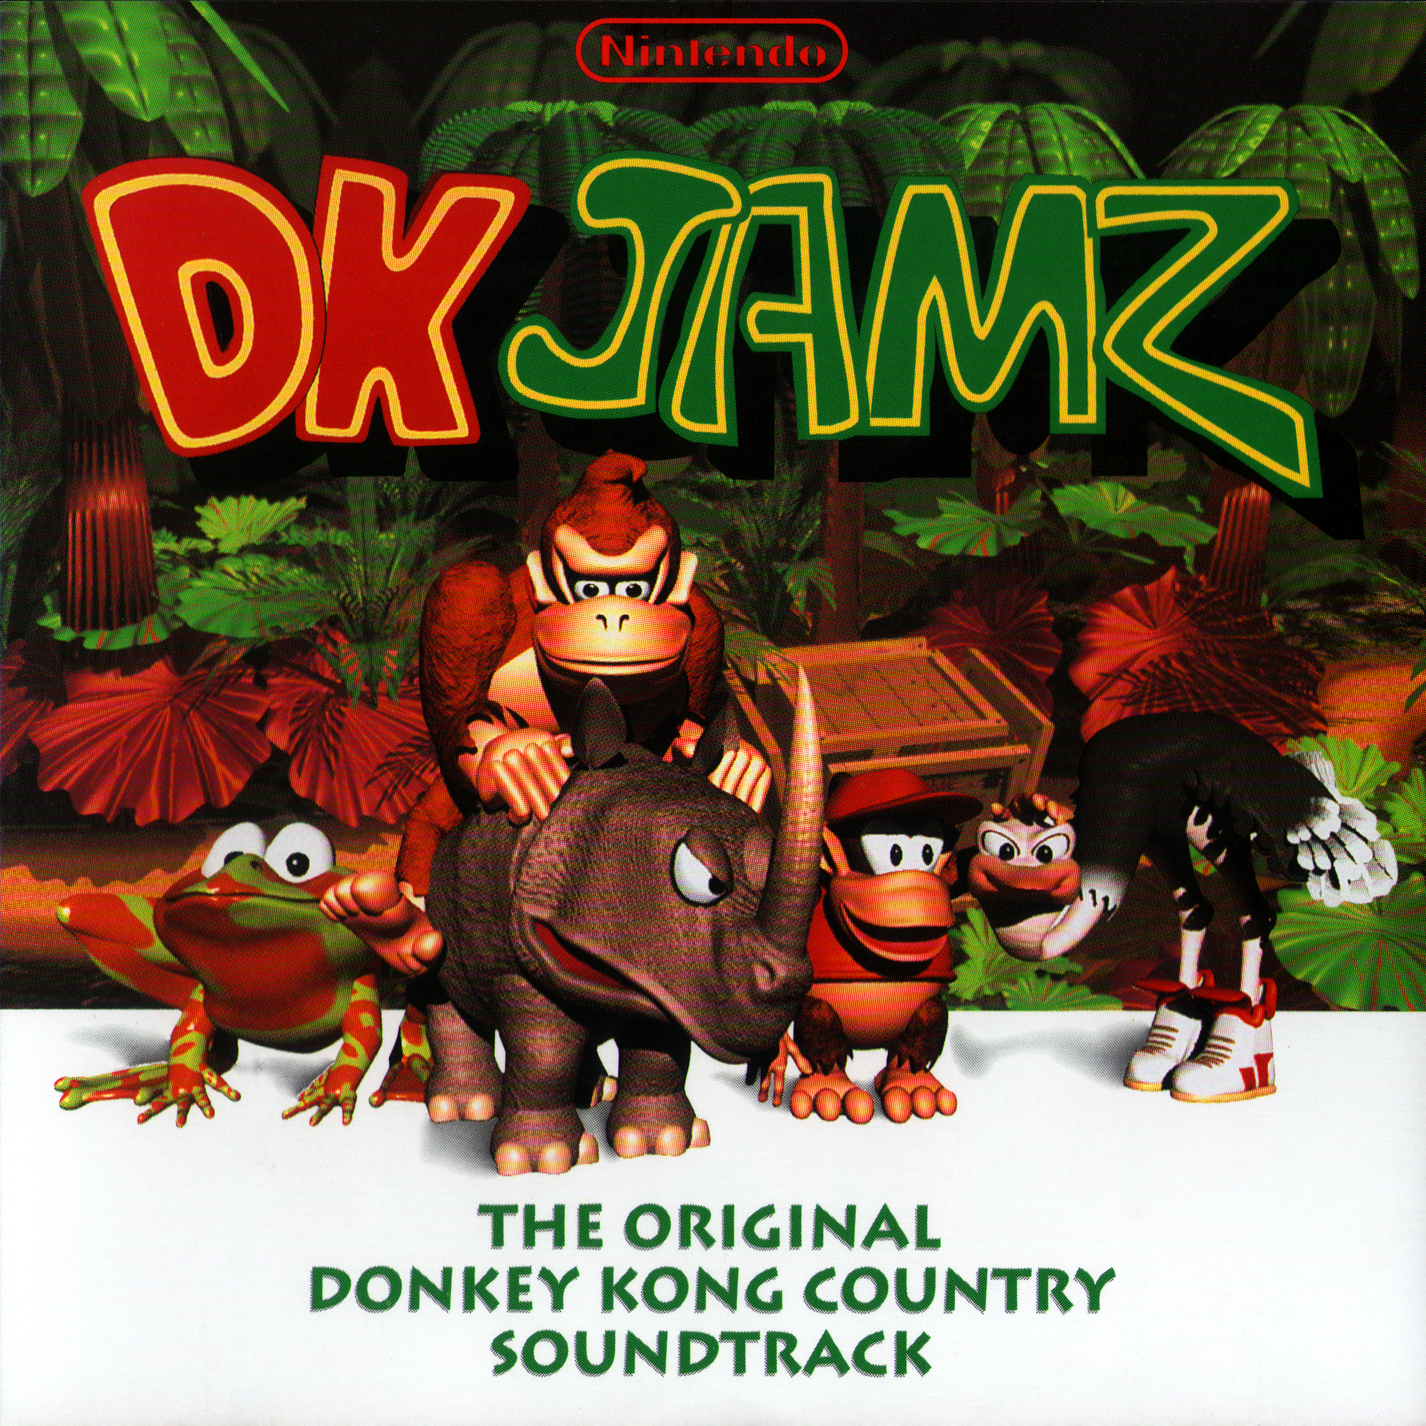 donkey kong country 2 forest interlude